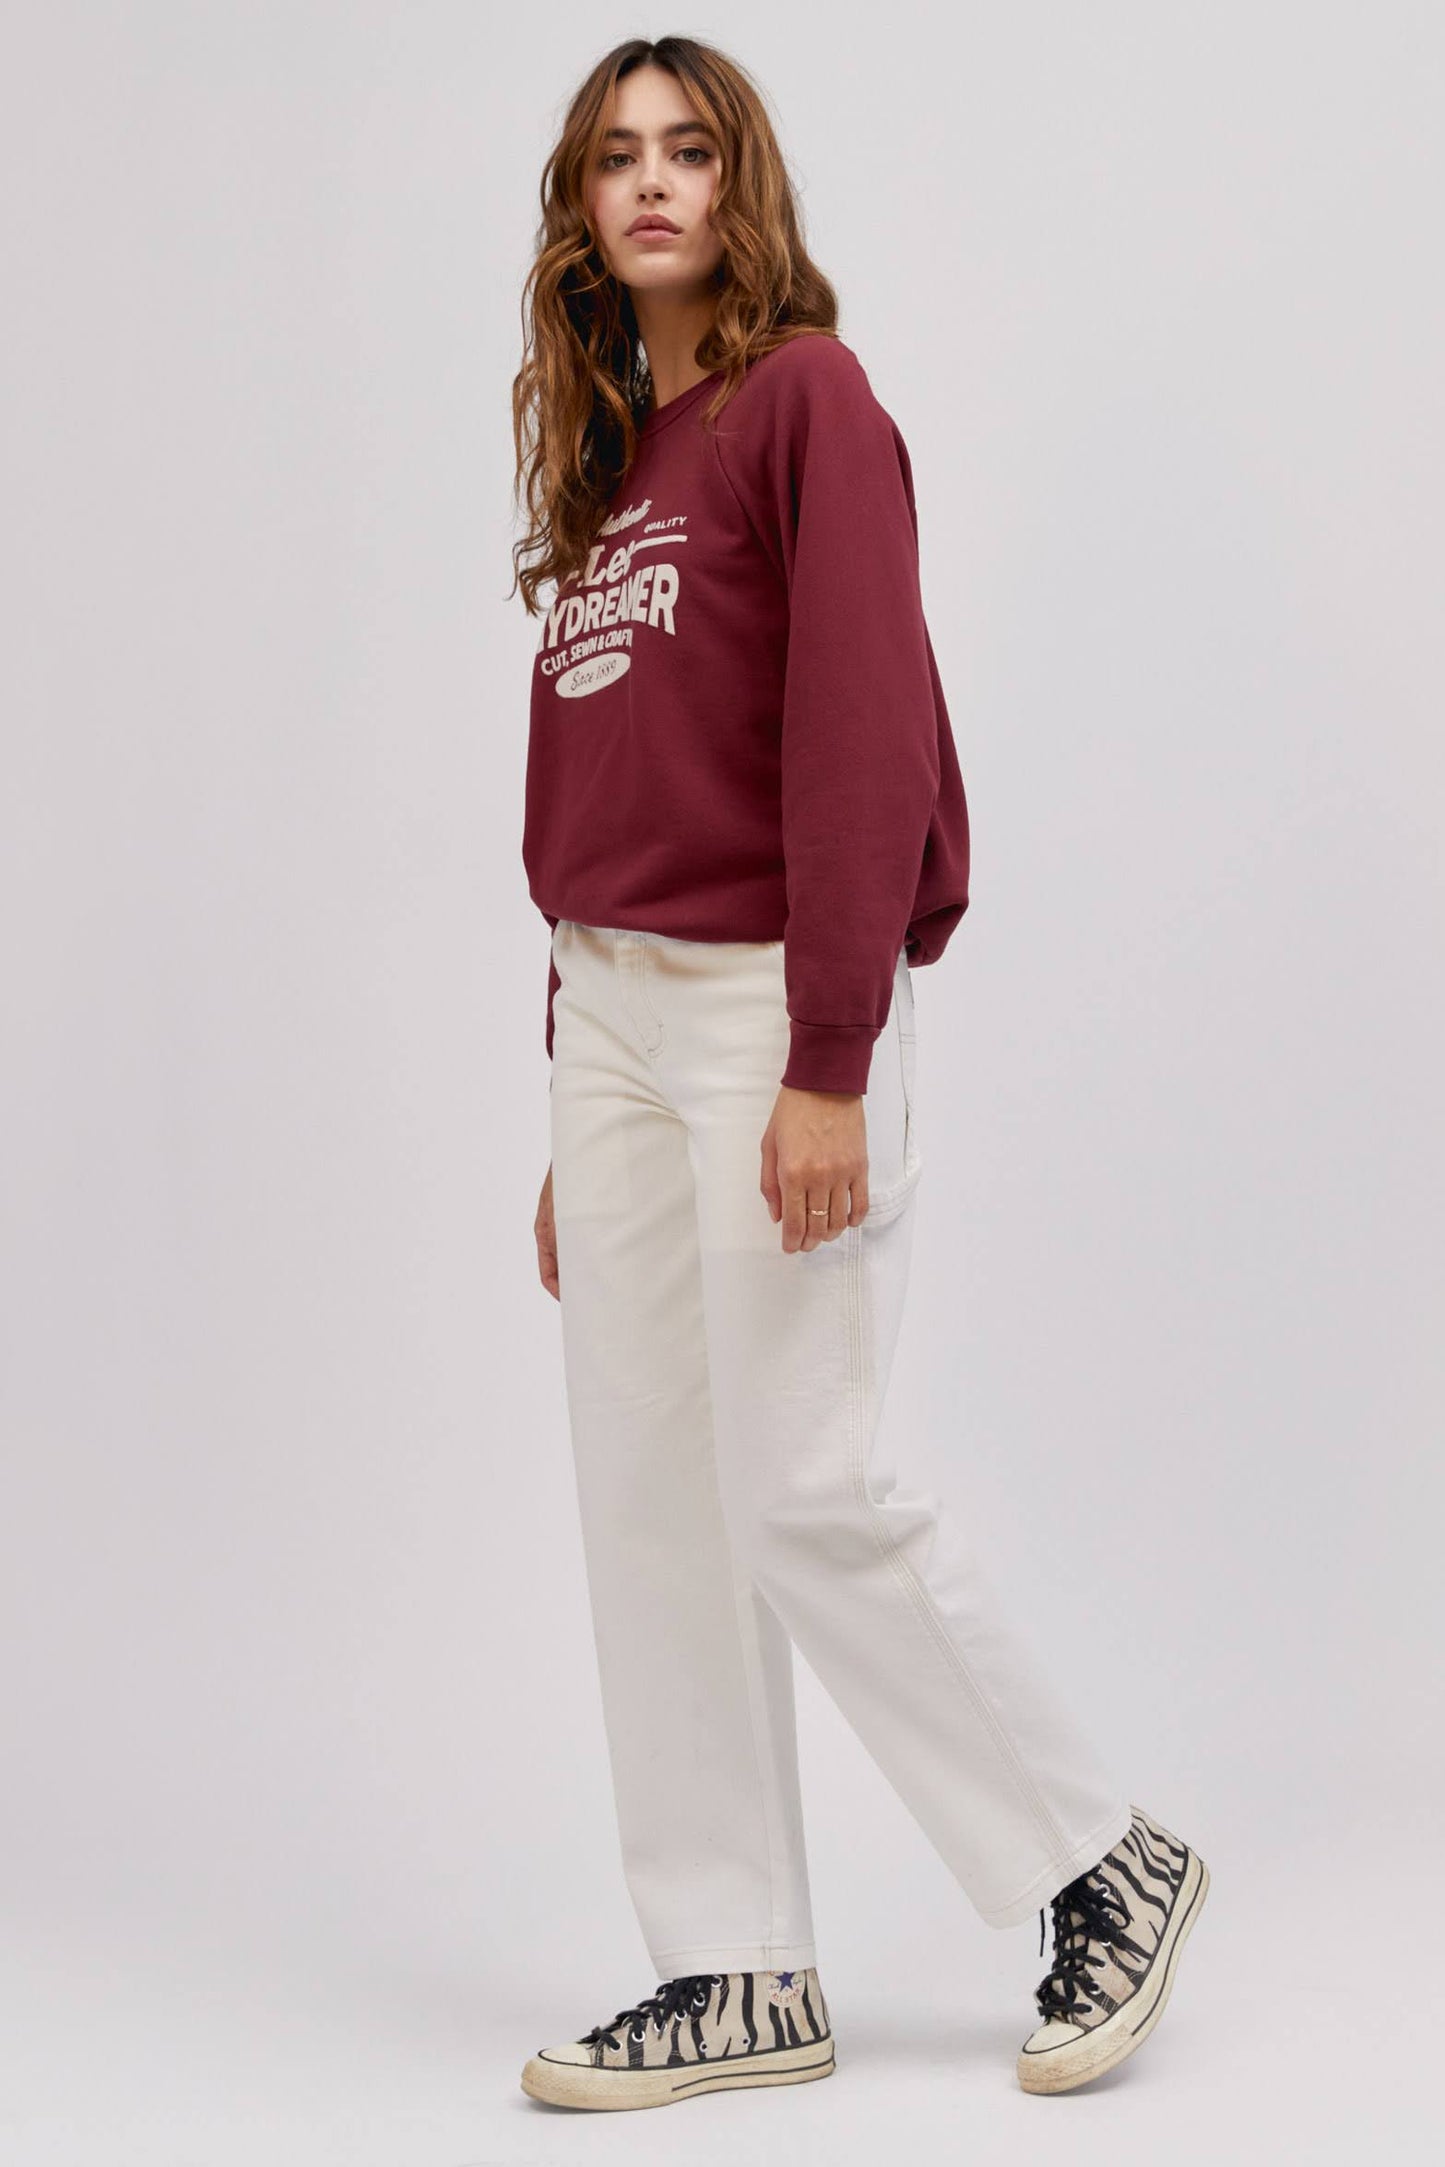 long wavy haired model in side standing pose wearing maroon colored sweatshirt and white workwear pants